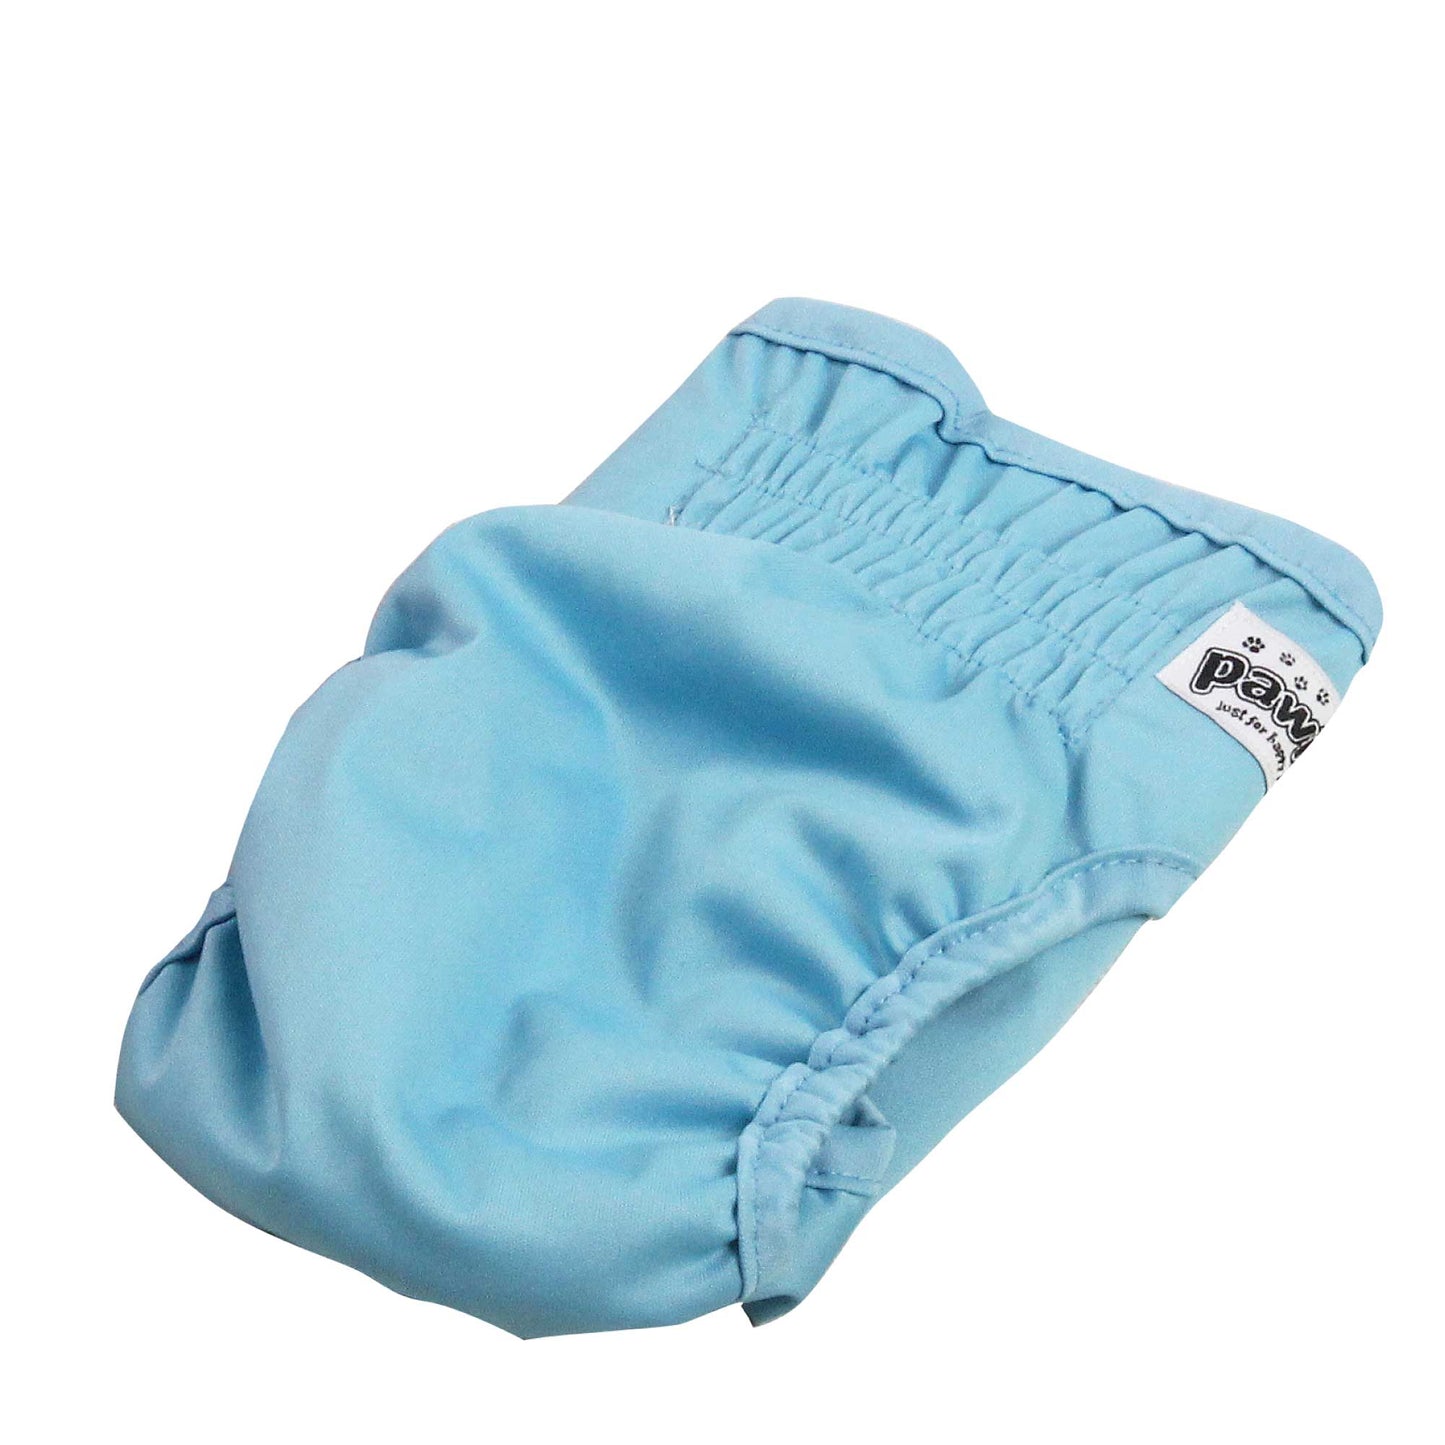 3 Pck Reusable Female Dog Diapers Puppy Nappy Eco Washable Period Incontinence Heat-3